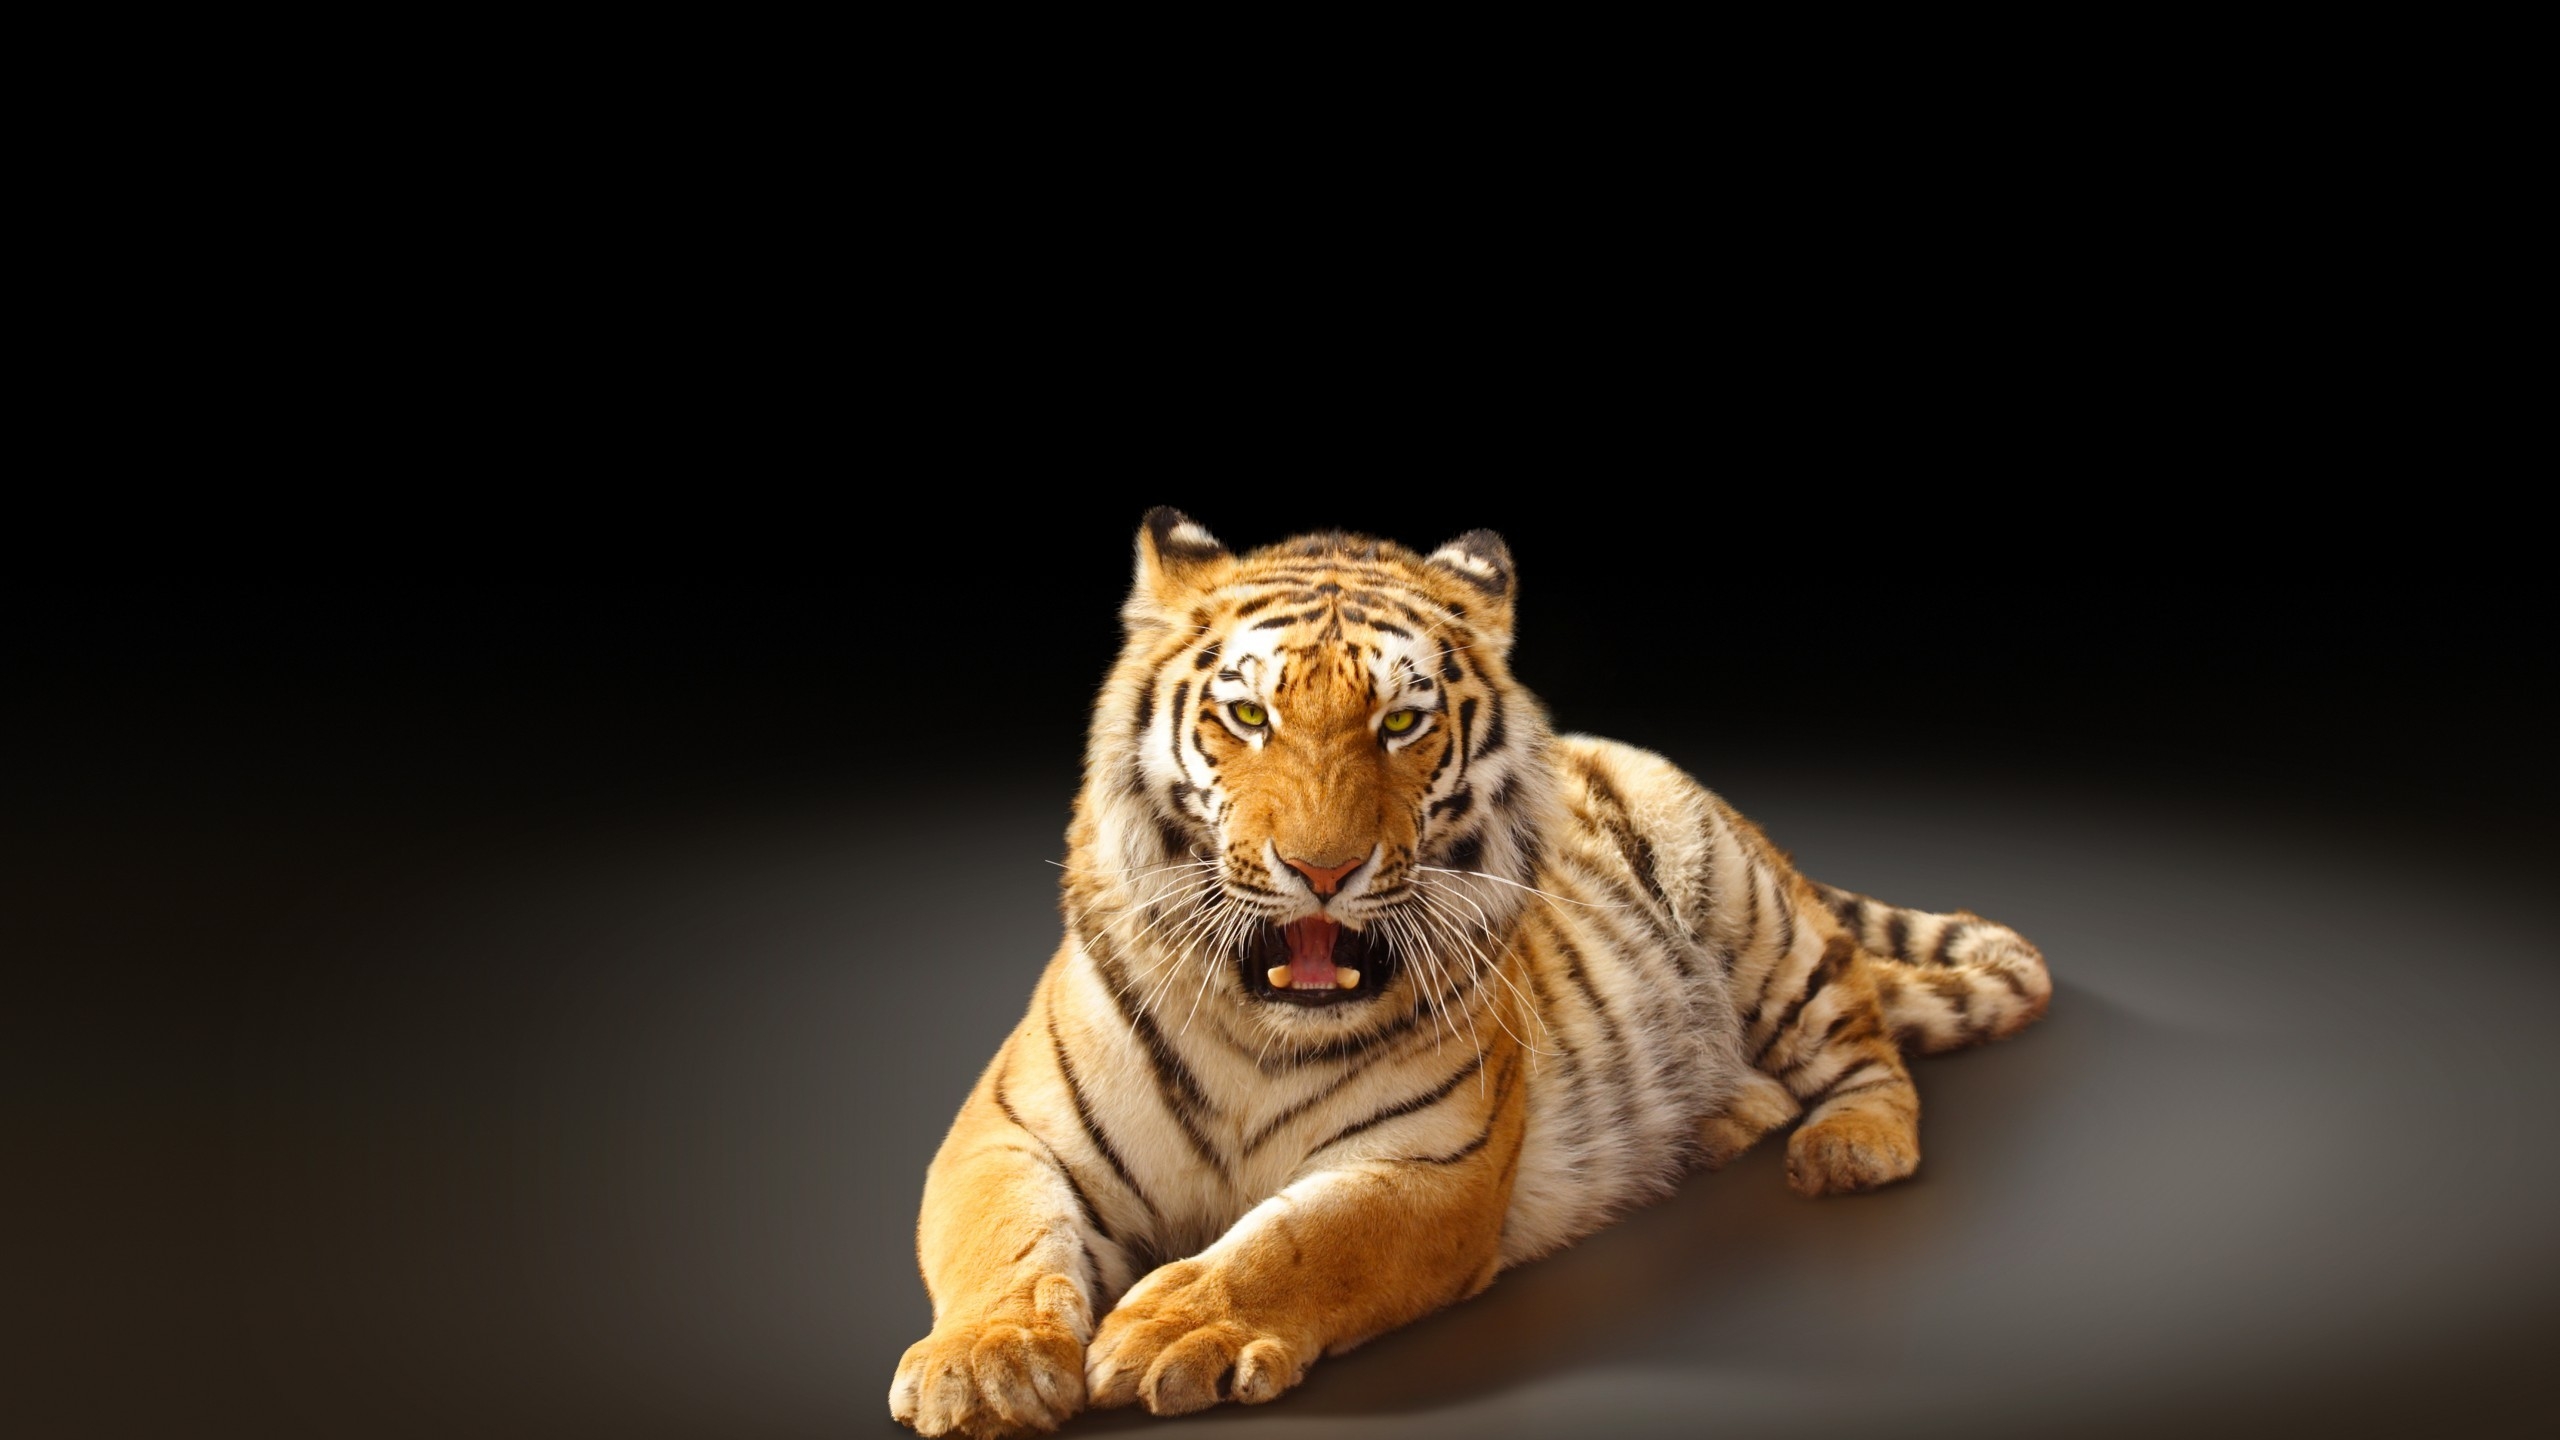 Angry Tiger Poster for 2560x1440 HDTV resolution